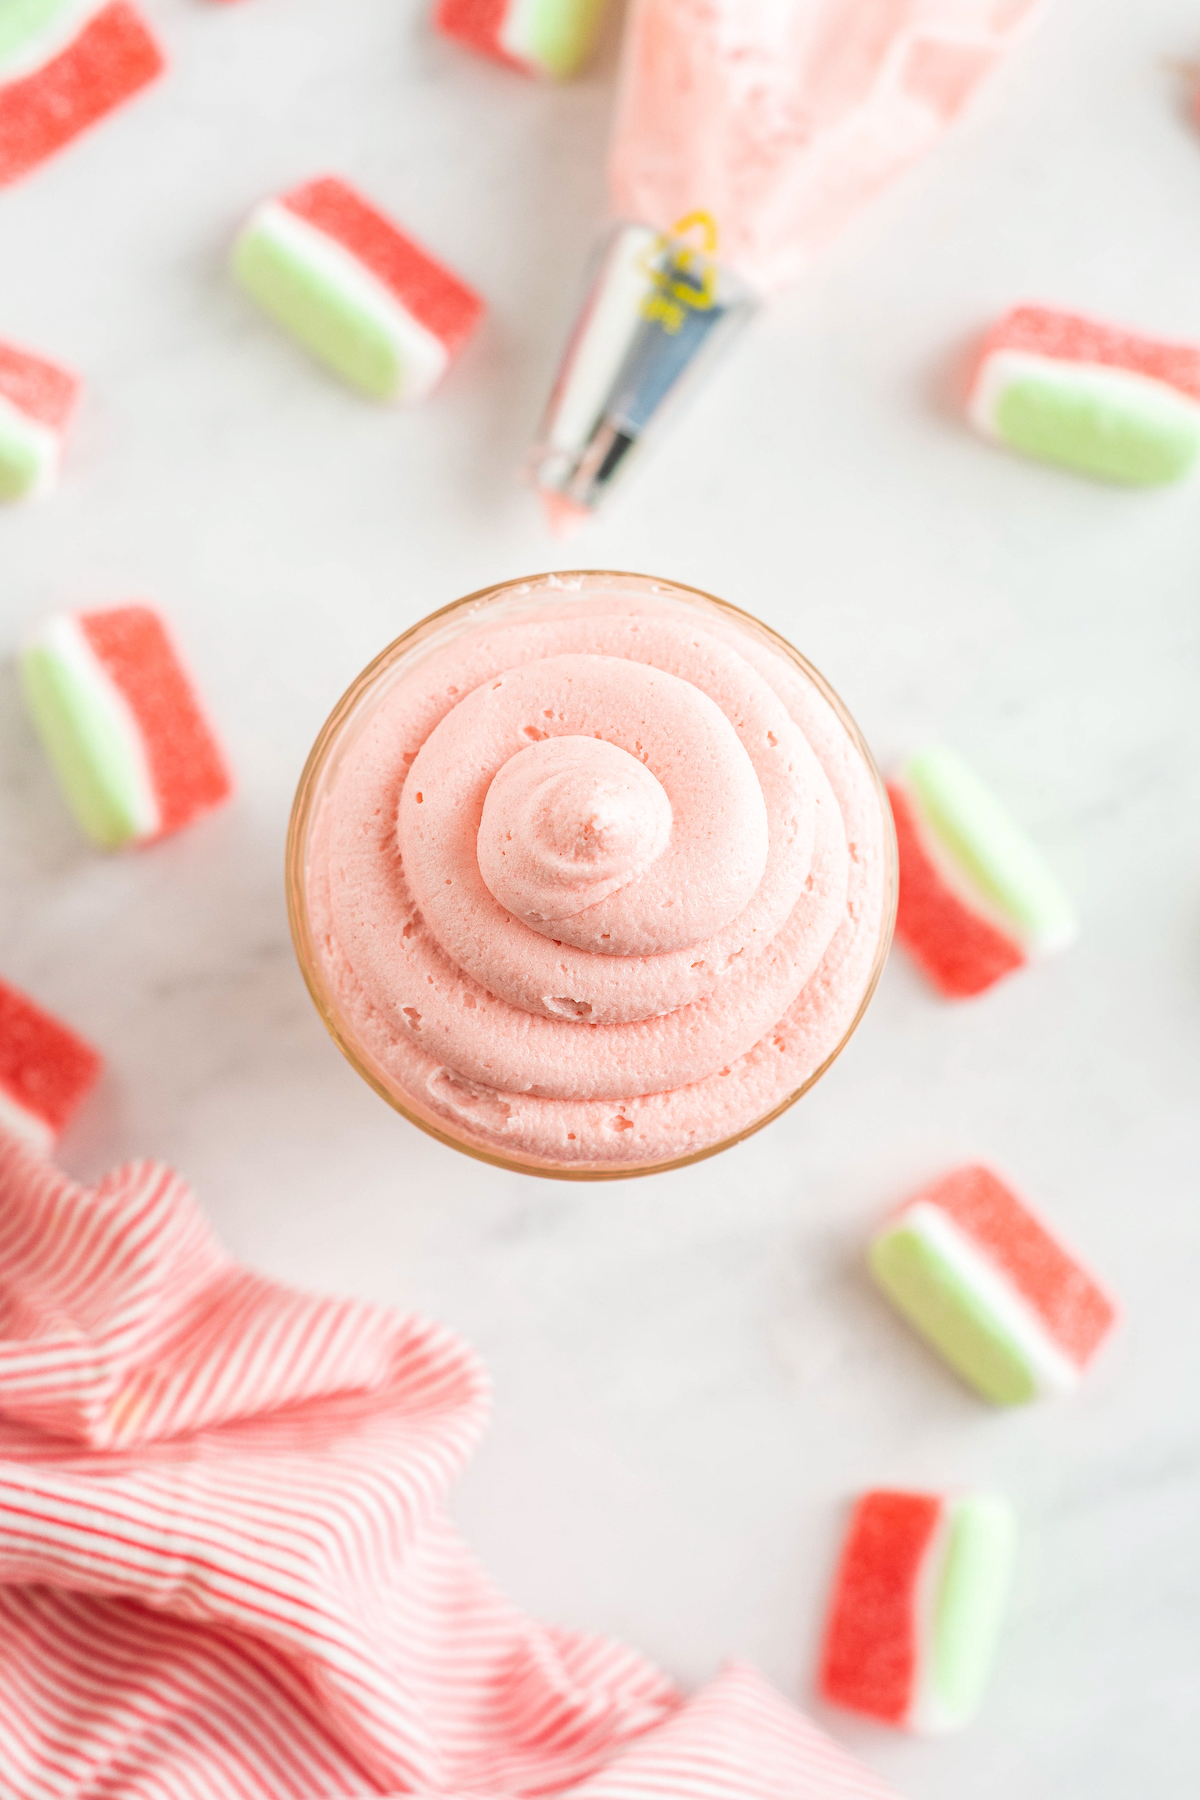 Top view of pink watermelon buttercream swirled inside a glass, next to scattered watermelon candies.